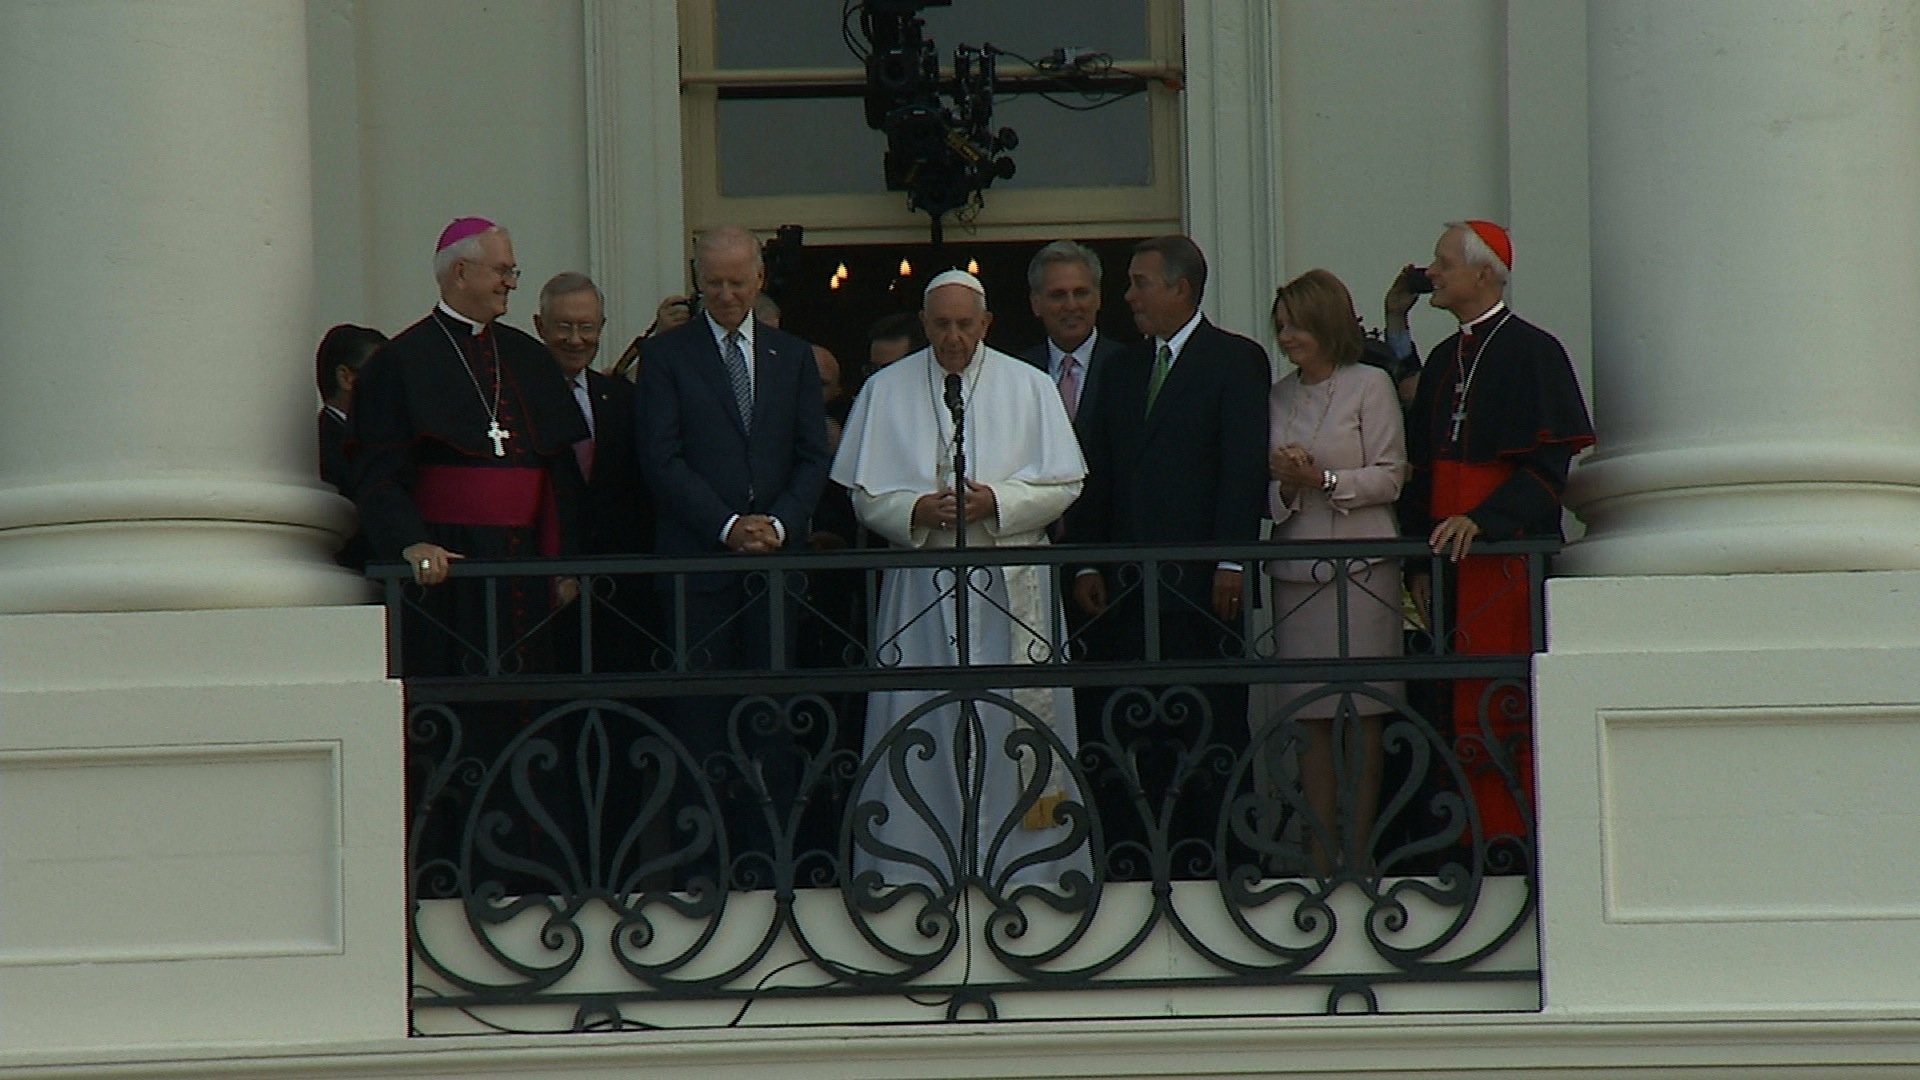 Vice President Joe Biden, Pope Francis, House Speaker John Boehner and others appear on the balcony of the U.S. Capitol after the Pope addressed Congress.